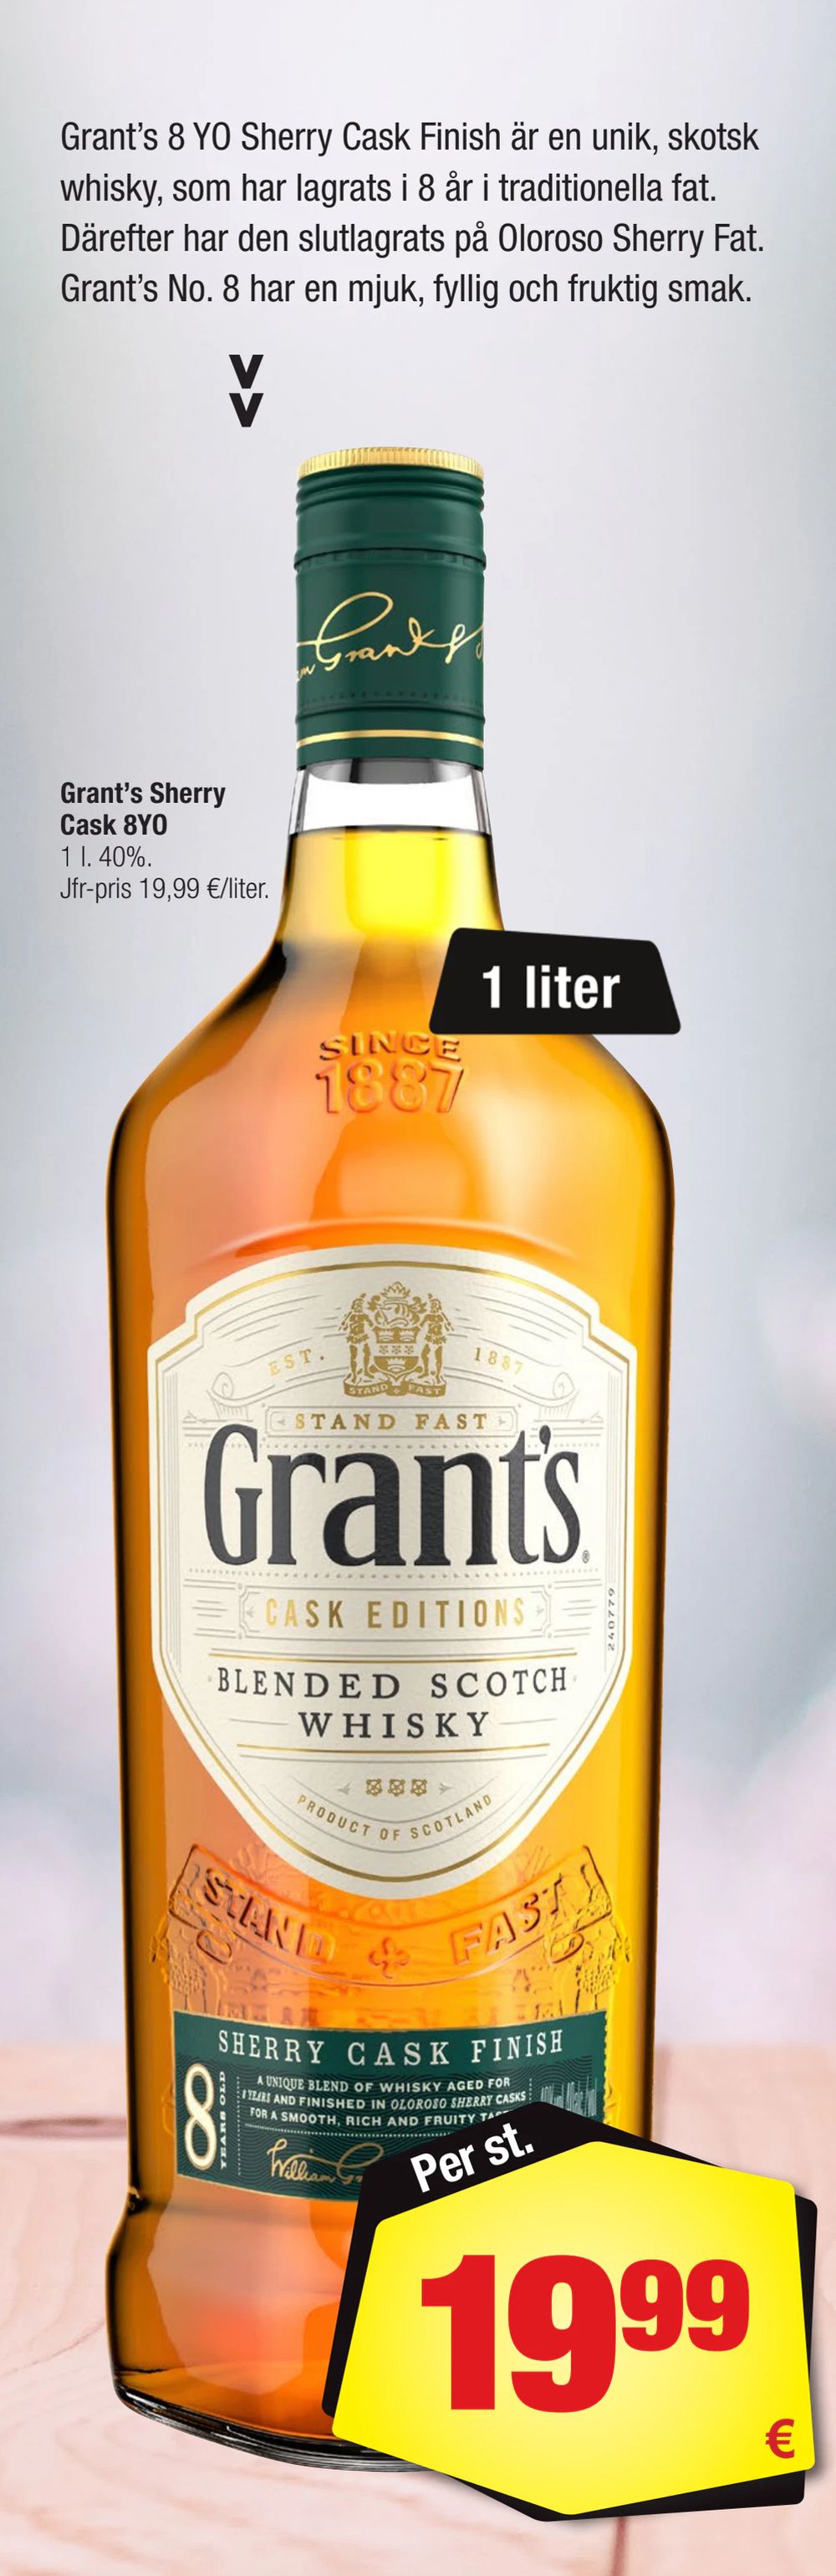 Deals on Grant’s Sherry Cask 8YO from Calle at 19,99 €